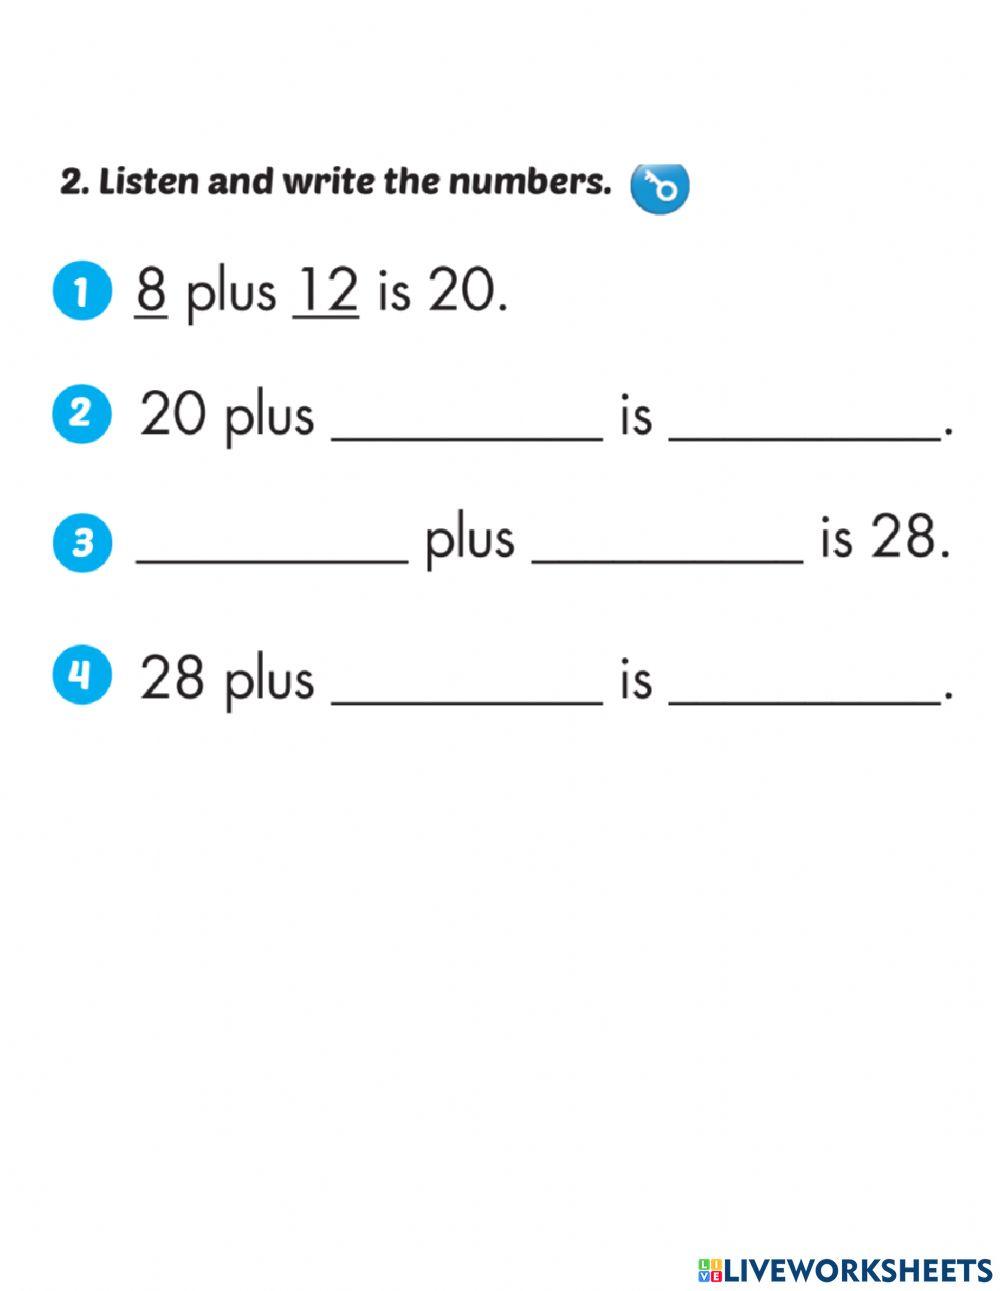 Listen and write the numbers- grade 4